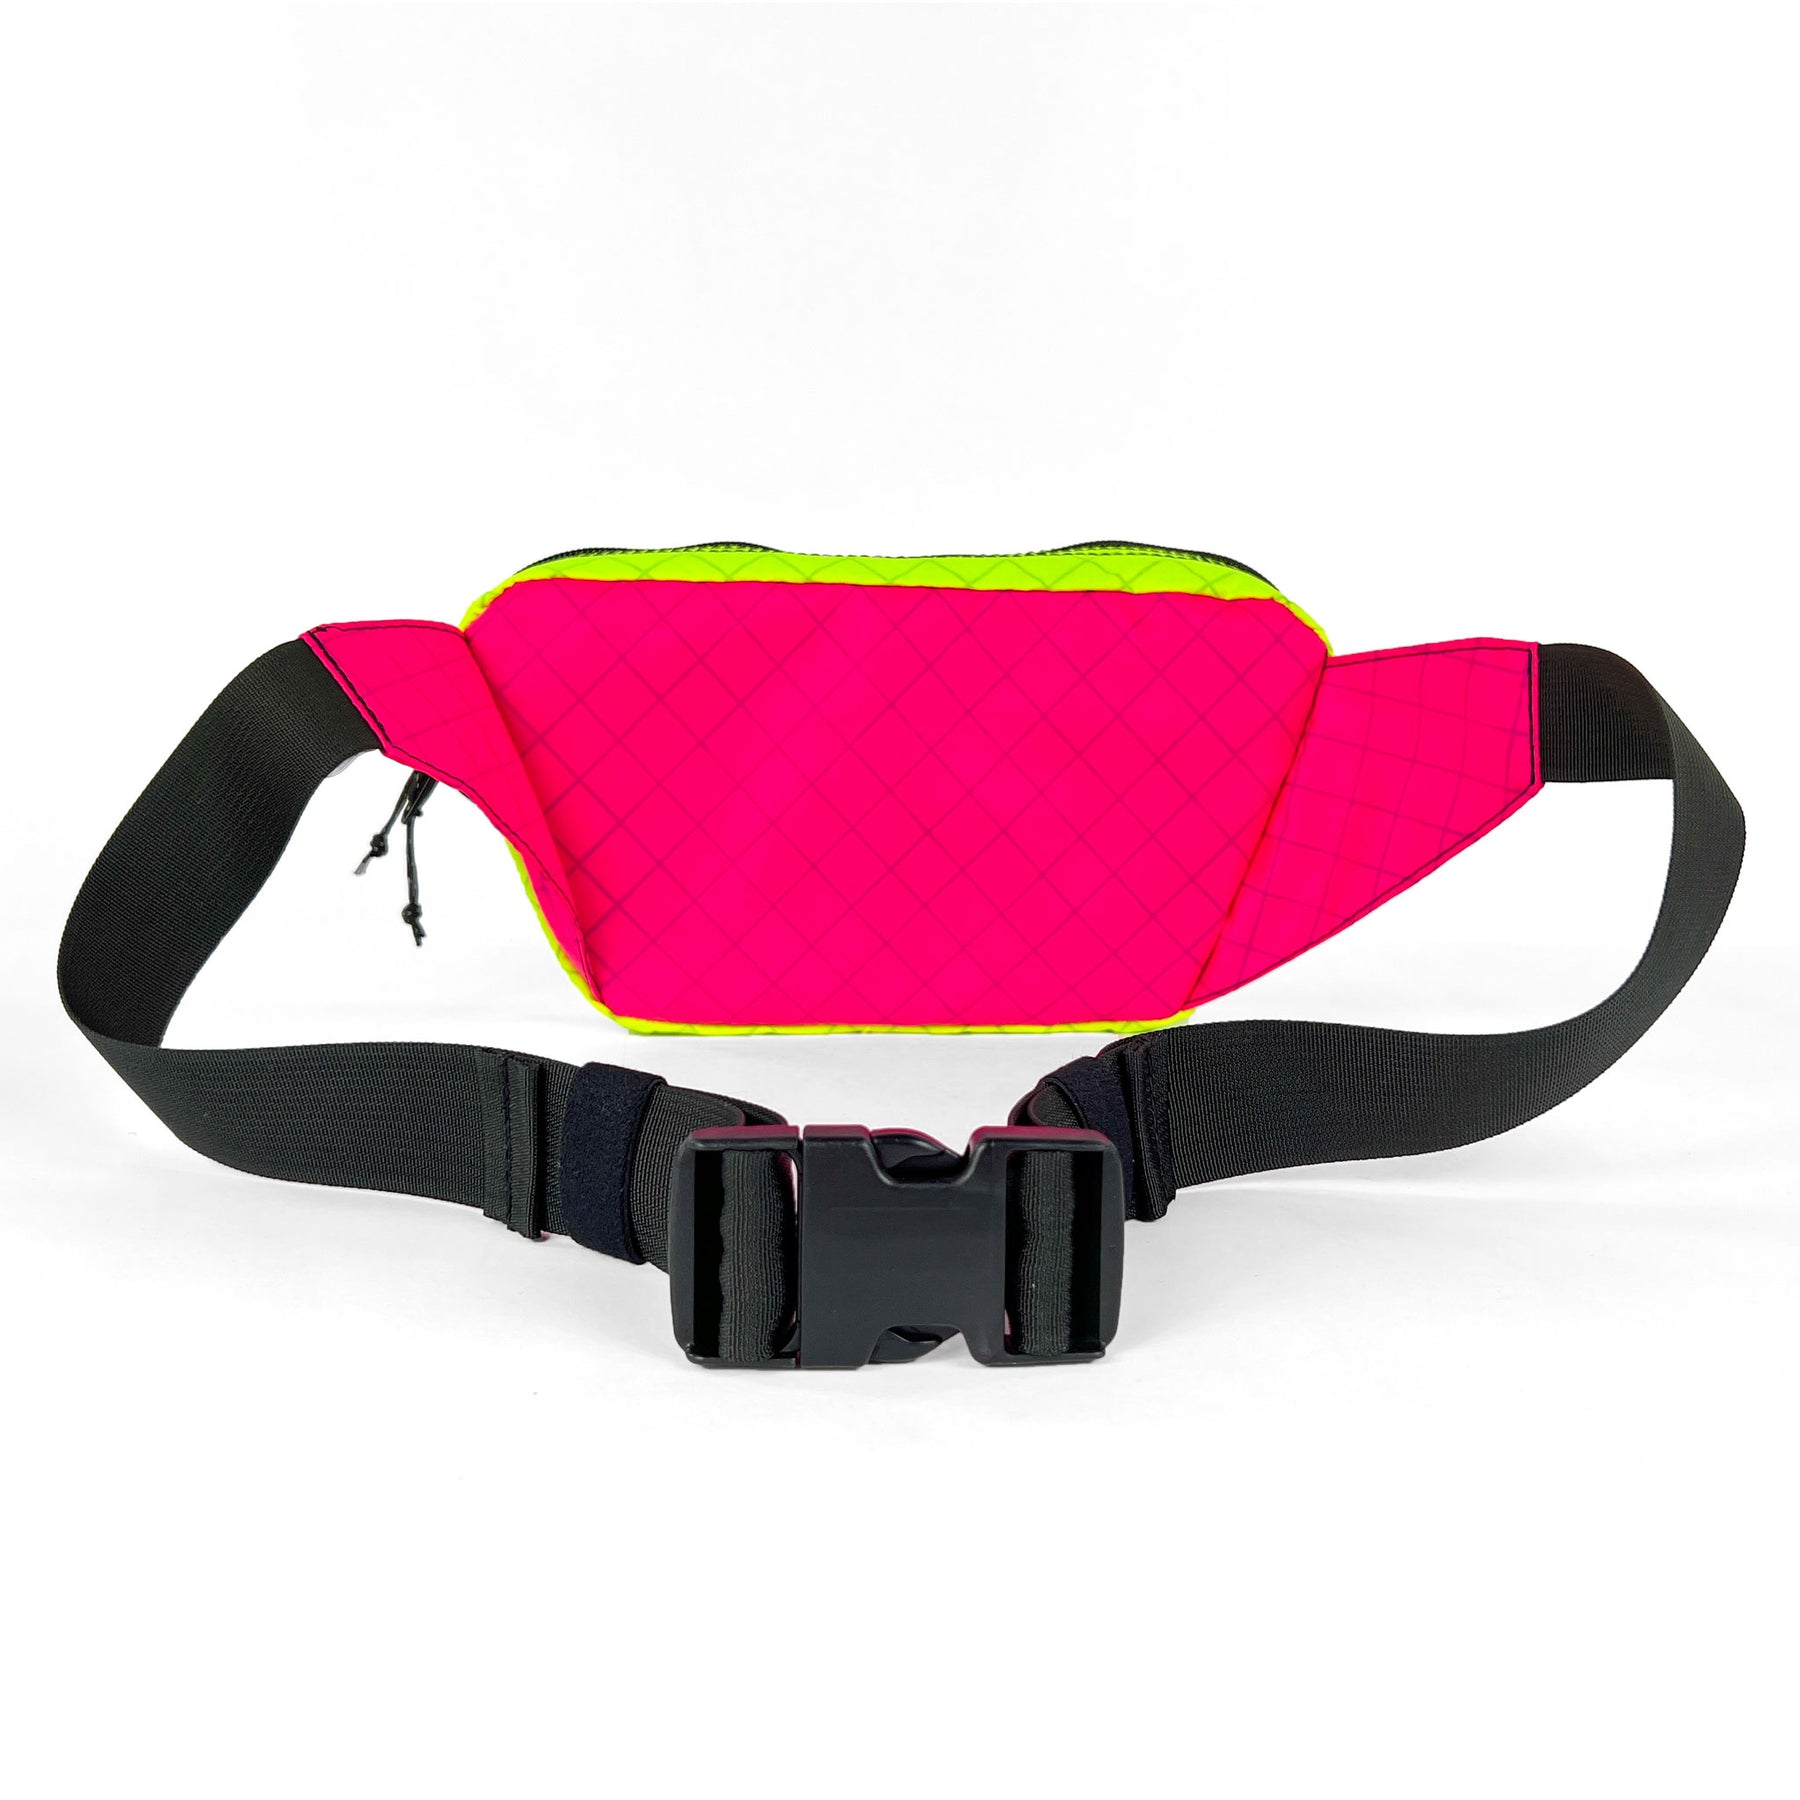 Thruster Fanny Pack